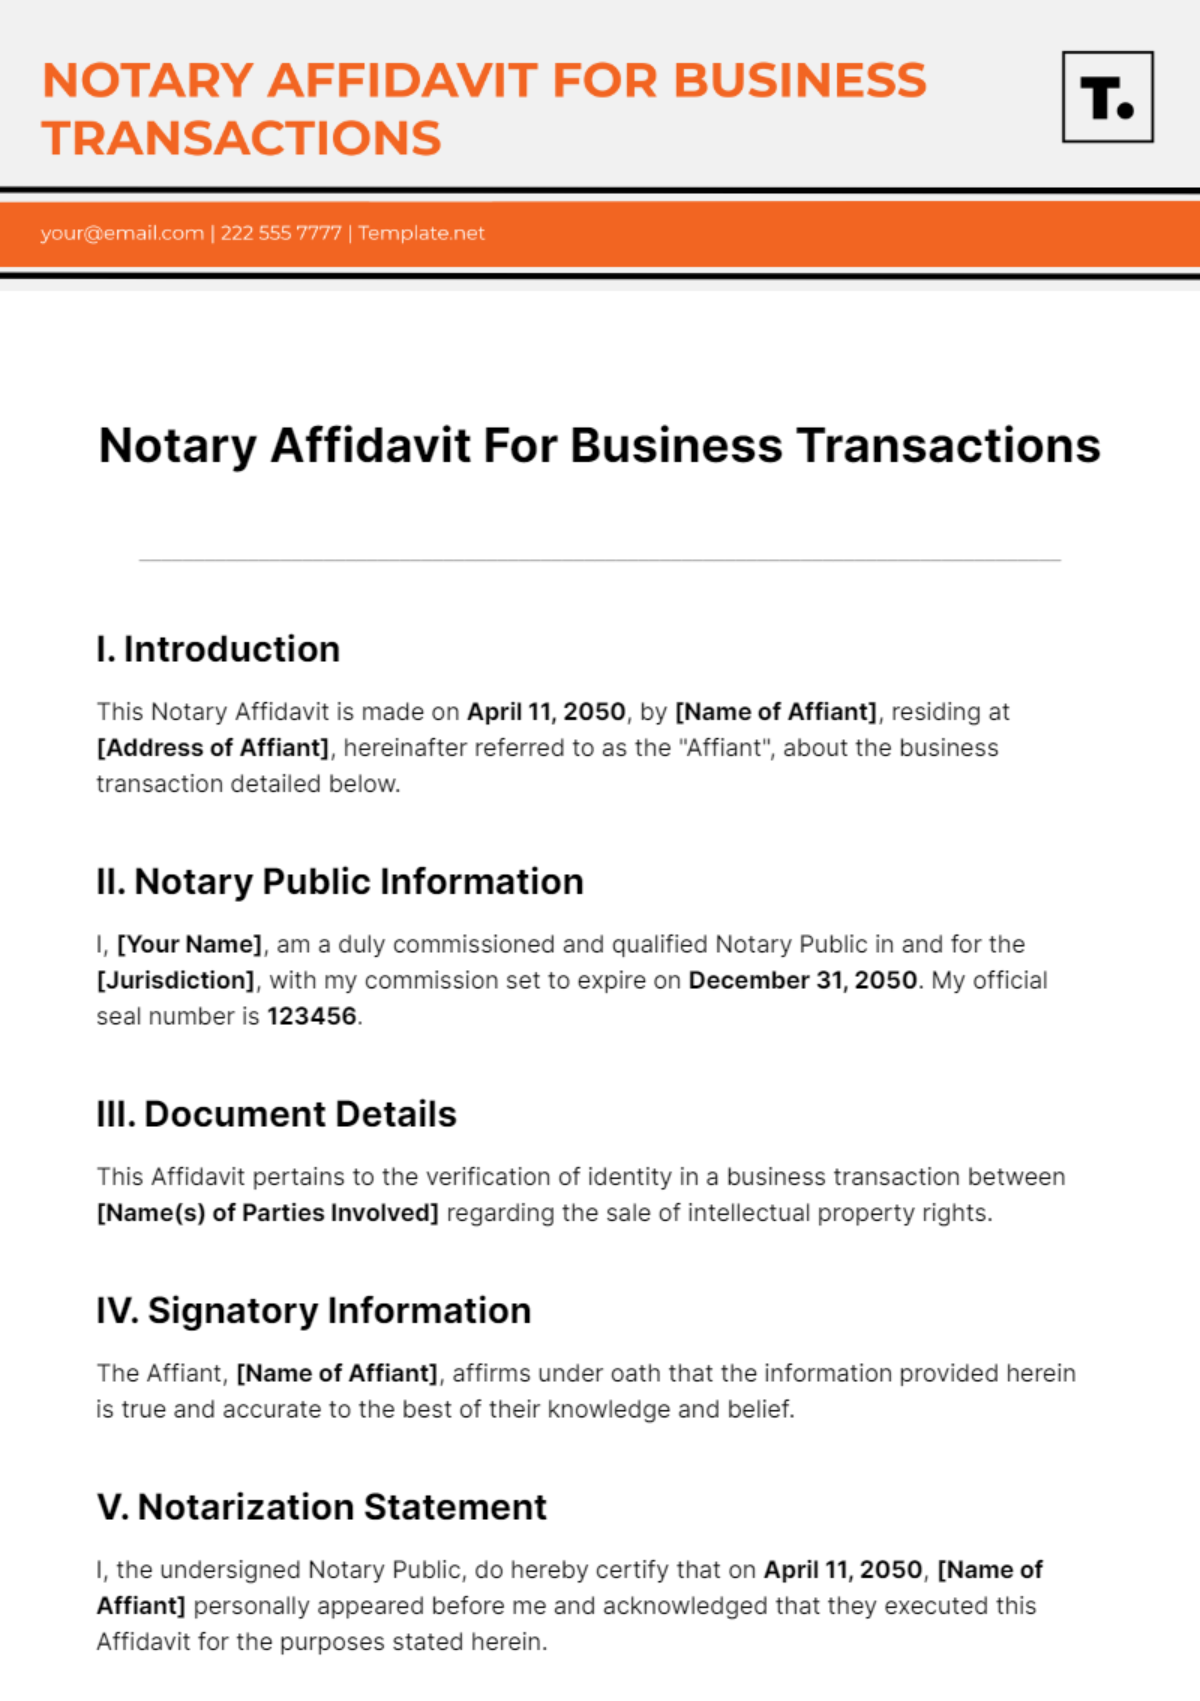 Notary Affidavit For Business Transactions Template